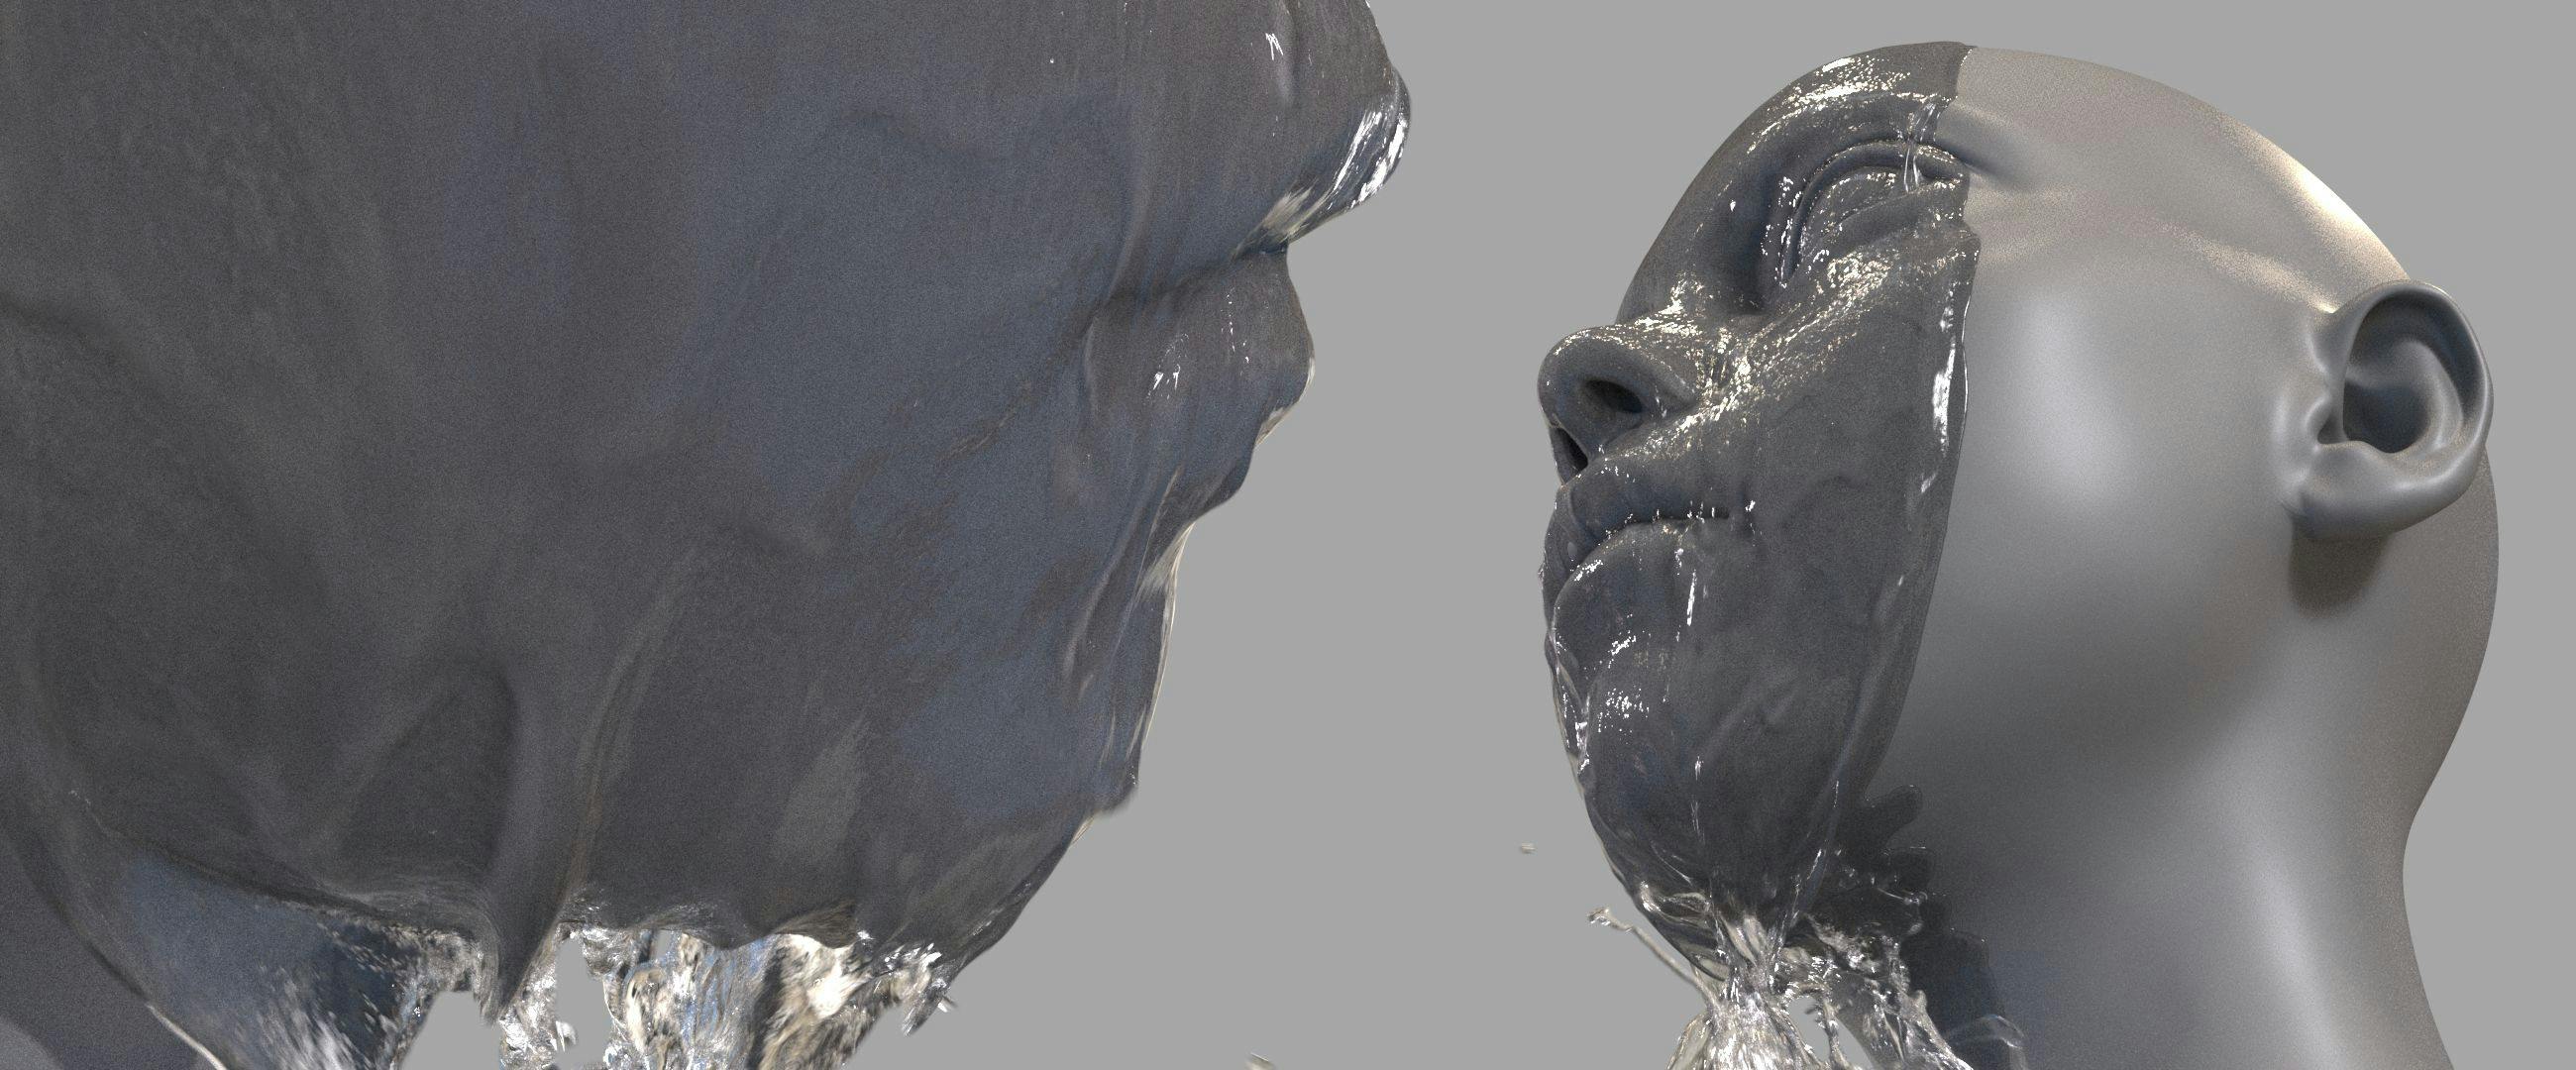 Close-up render of high-fidelity surface tension and adhesion affects, taken from the SIGGRAPH 2019 session “A practical guide to thin film and drips simulation” 